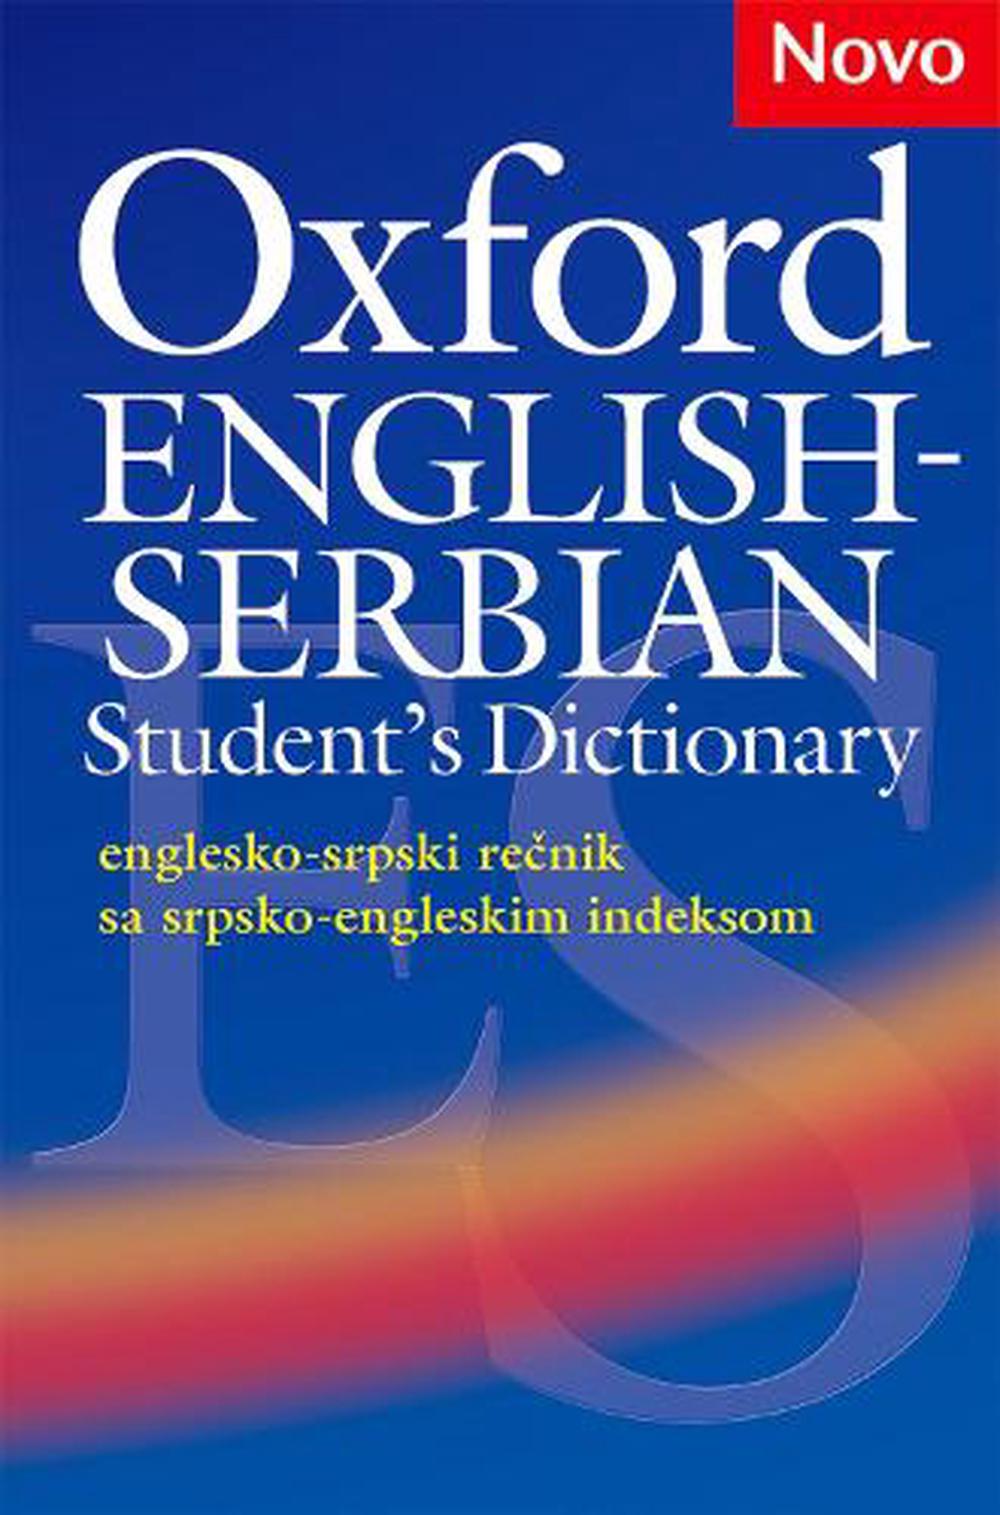 Student dictionary. Oxford student's Dictionary. Oxford English Grammar. Oxford Elementary student's Dictionary. Oxford first Thesaurus.